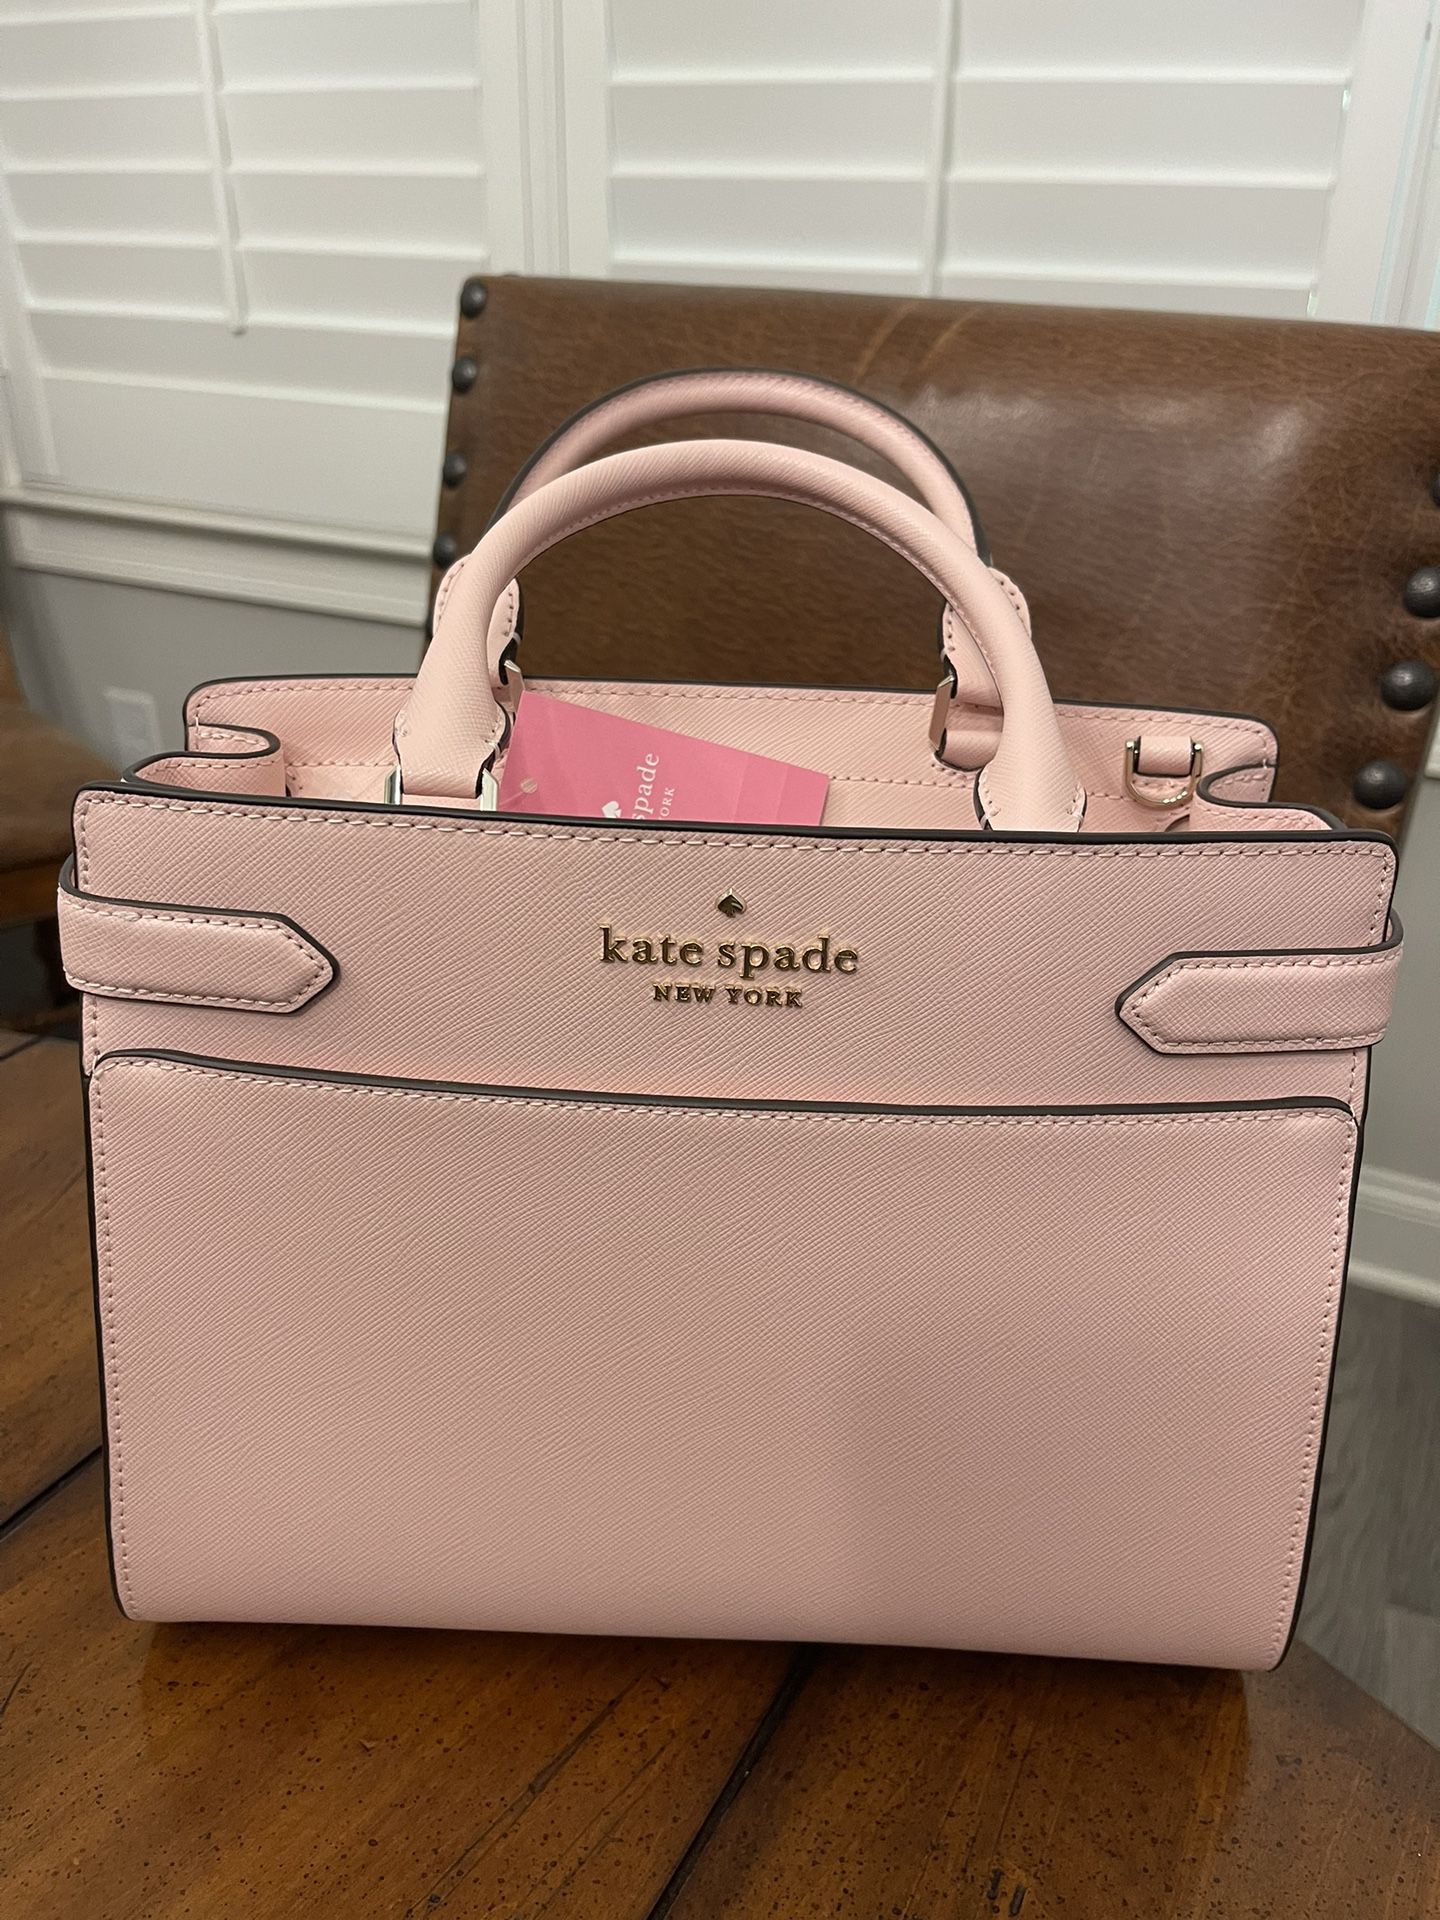 Brand new Kate spade bag. Bag is medium satchel in chalk pink. Comes from a smoke free home.